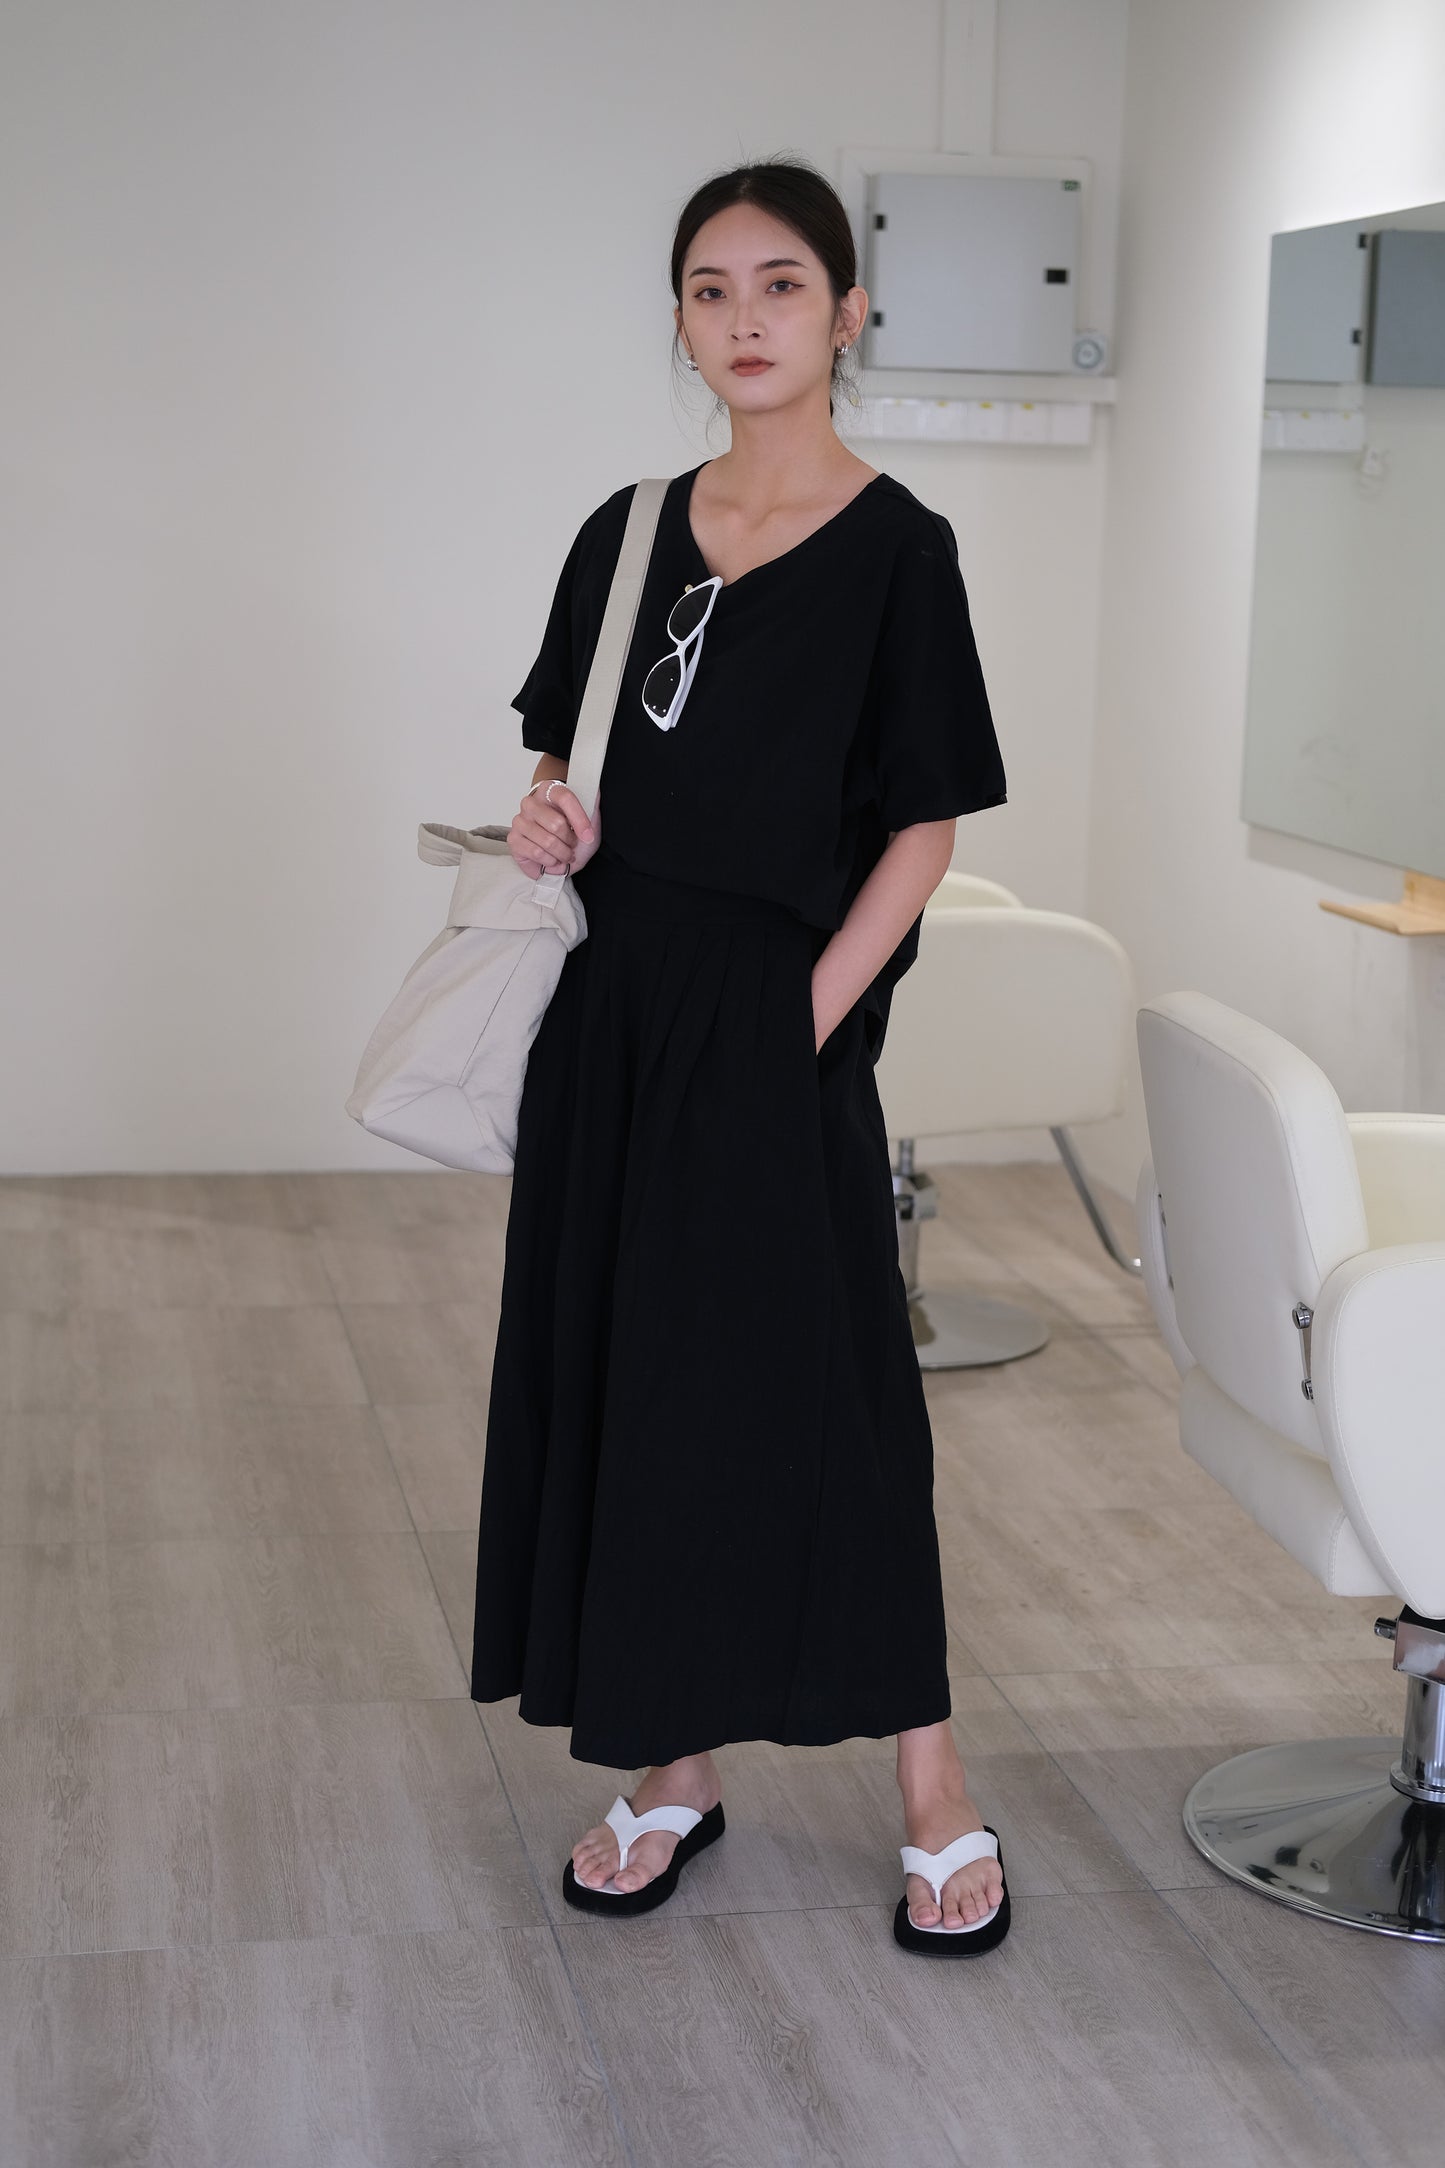 Cotton and linen short-sleeved T-shirt + wide-leg pants in classic black